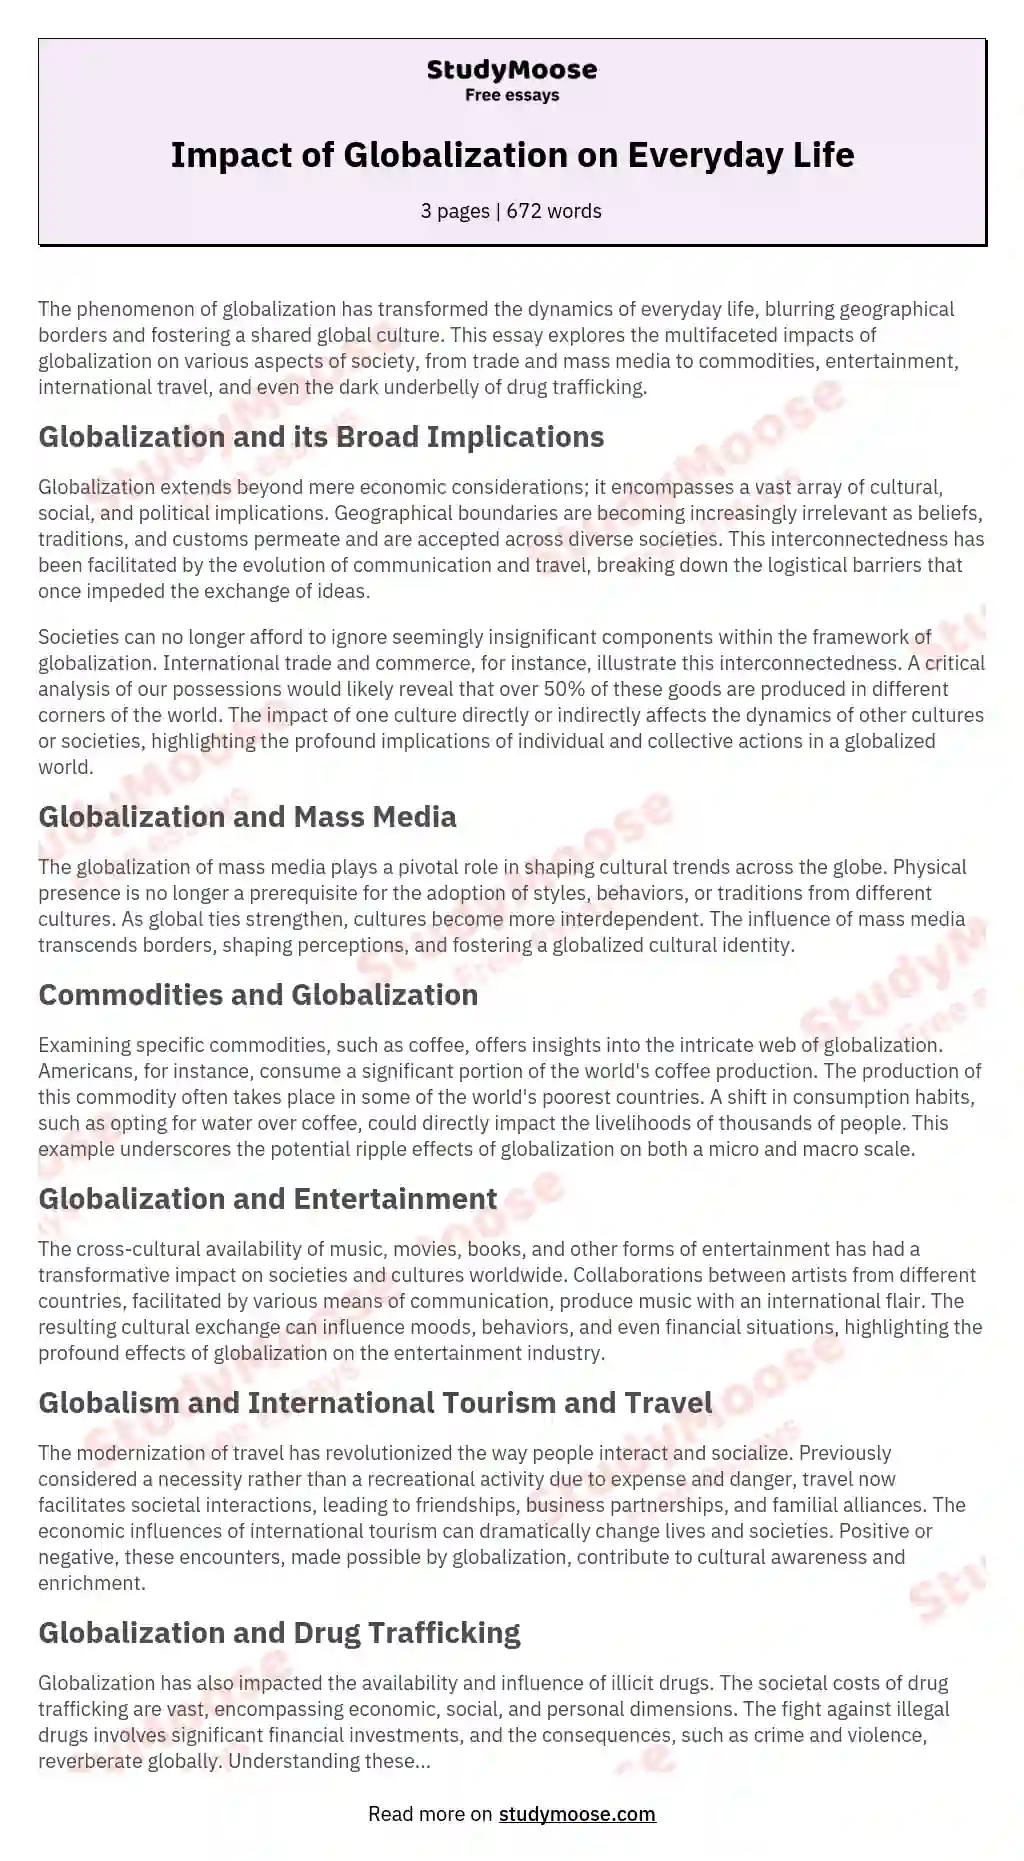 Impact of Globalization on Everyday Life essay